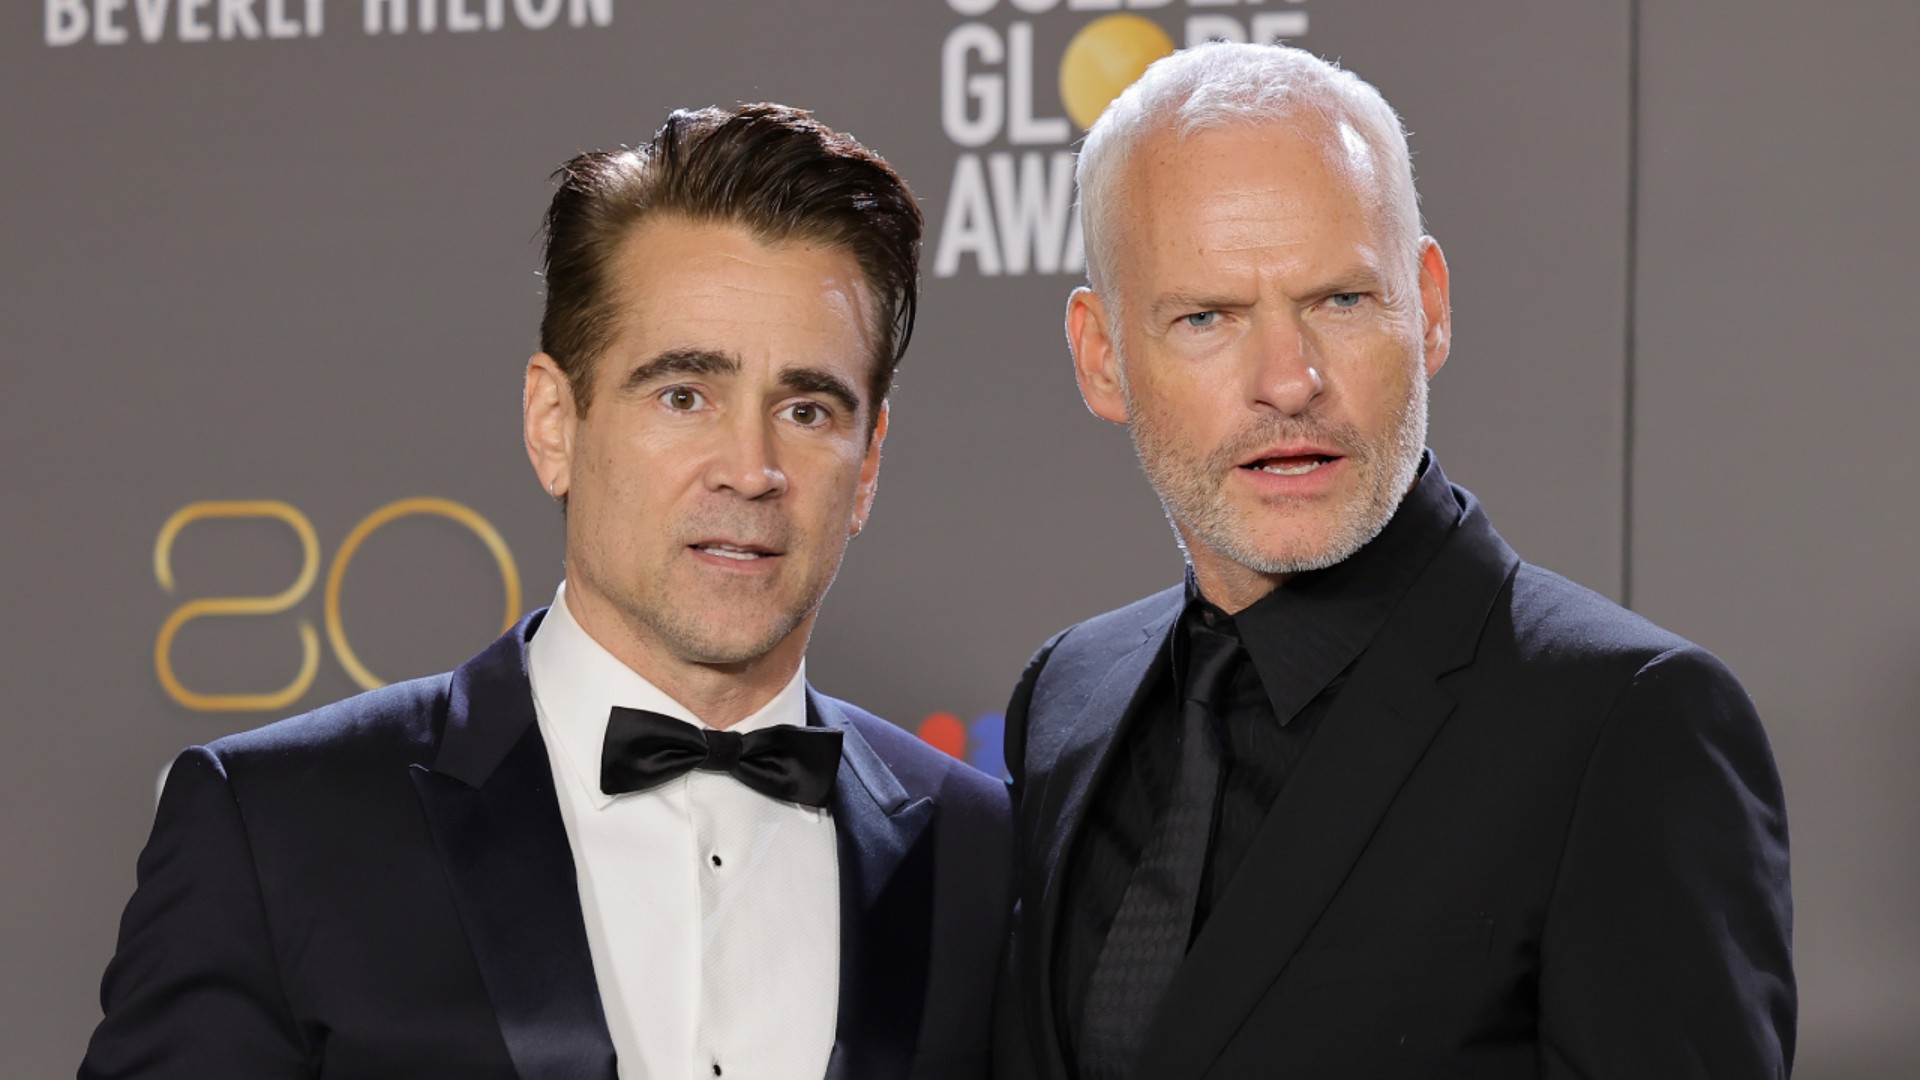 WATCH: Colin Farrell Gives Charming and Emotional Speech at Golden Globe Awards